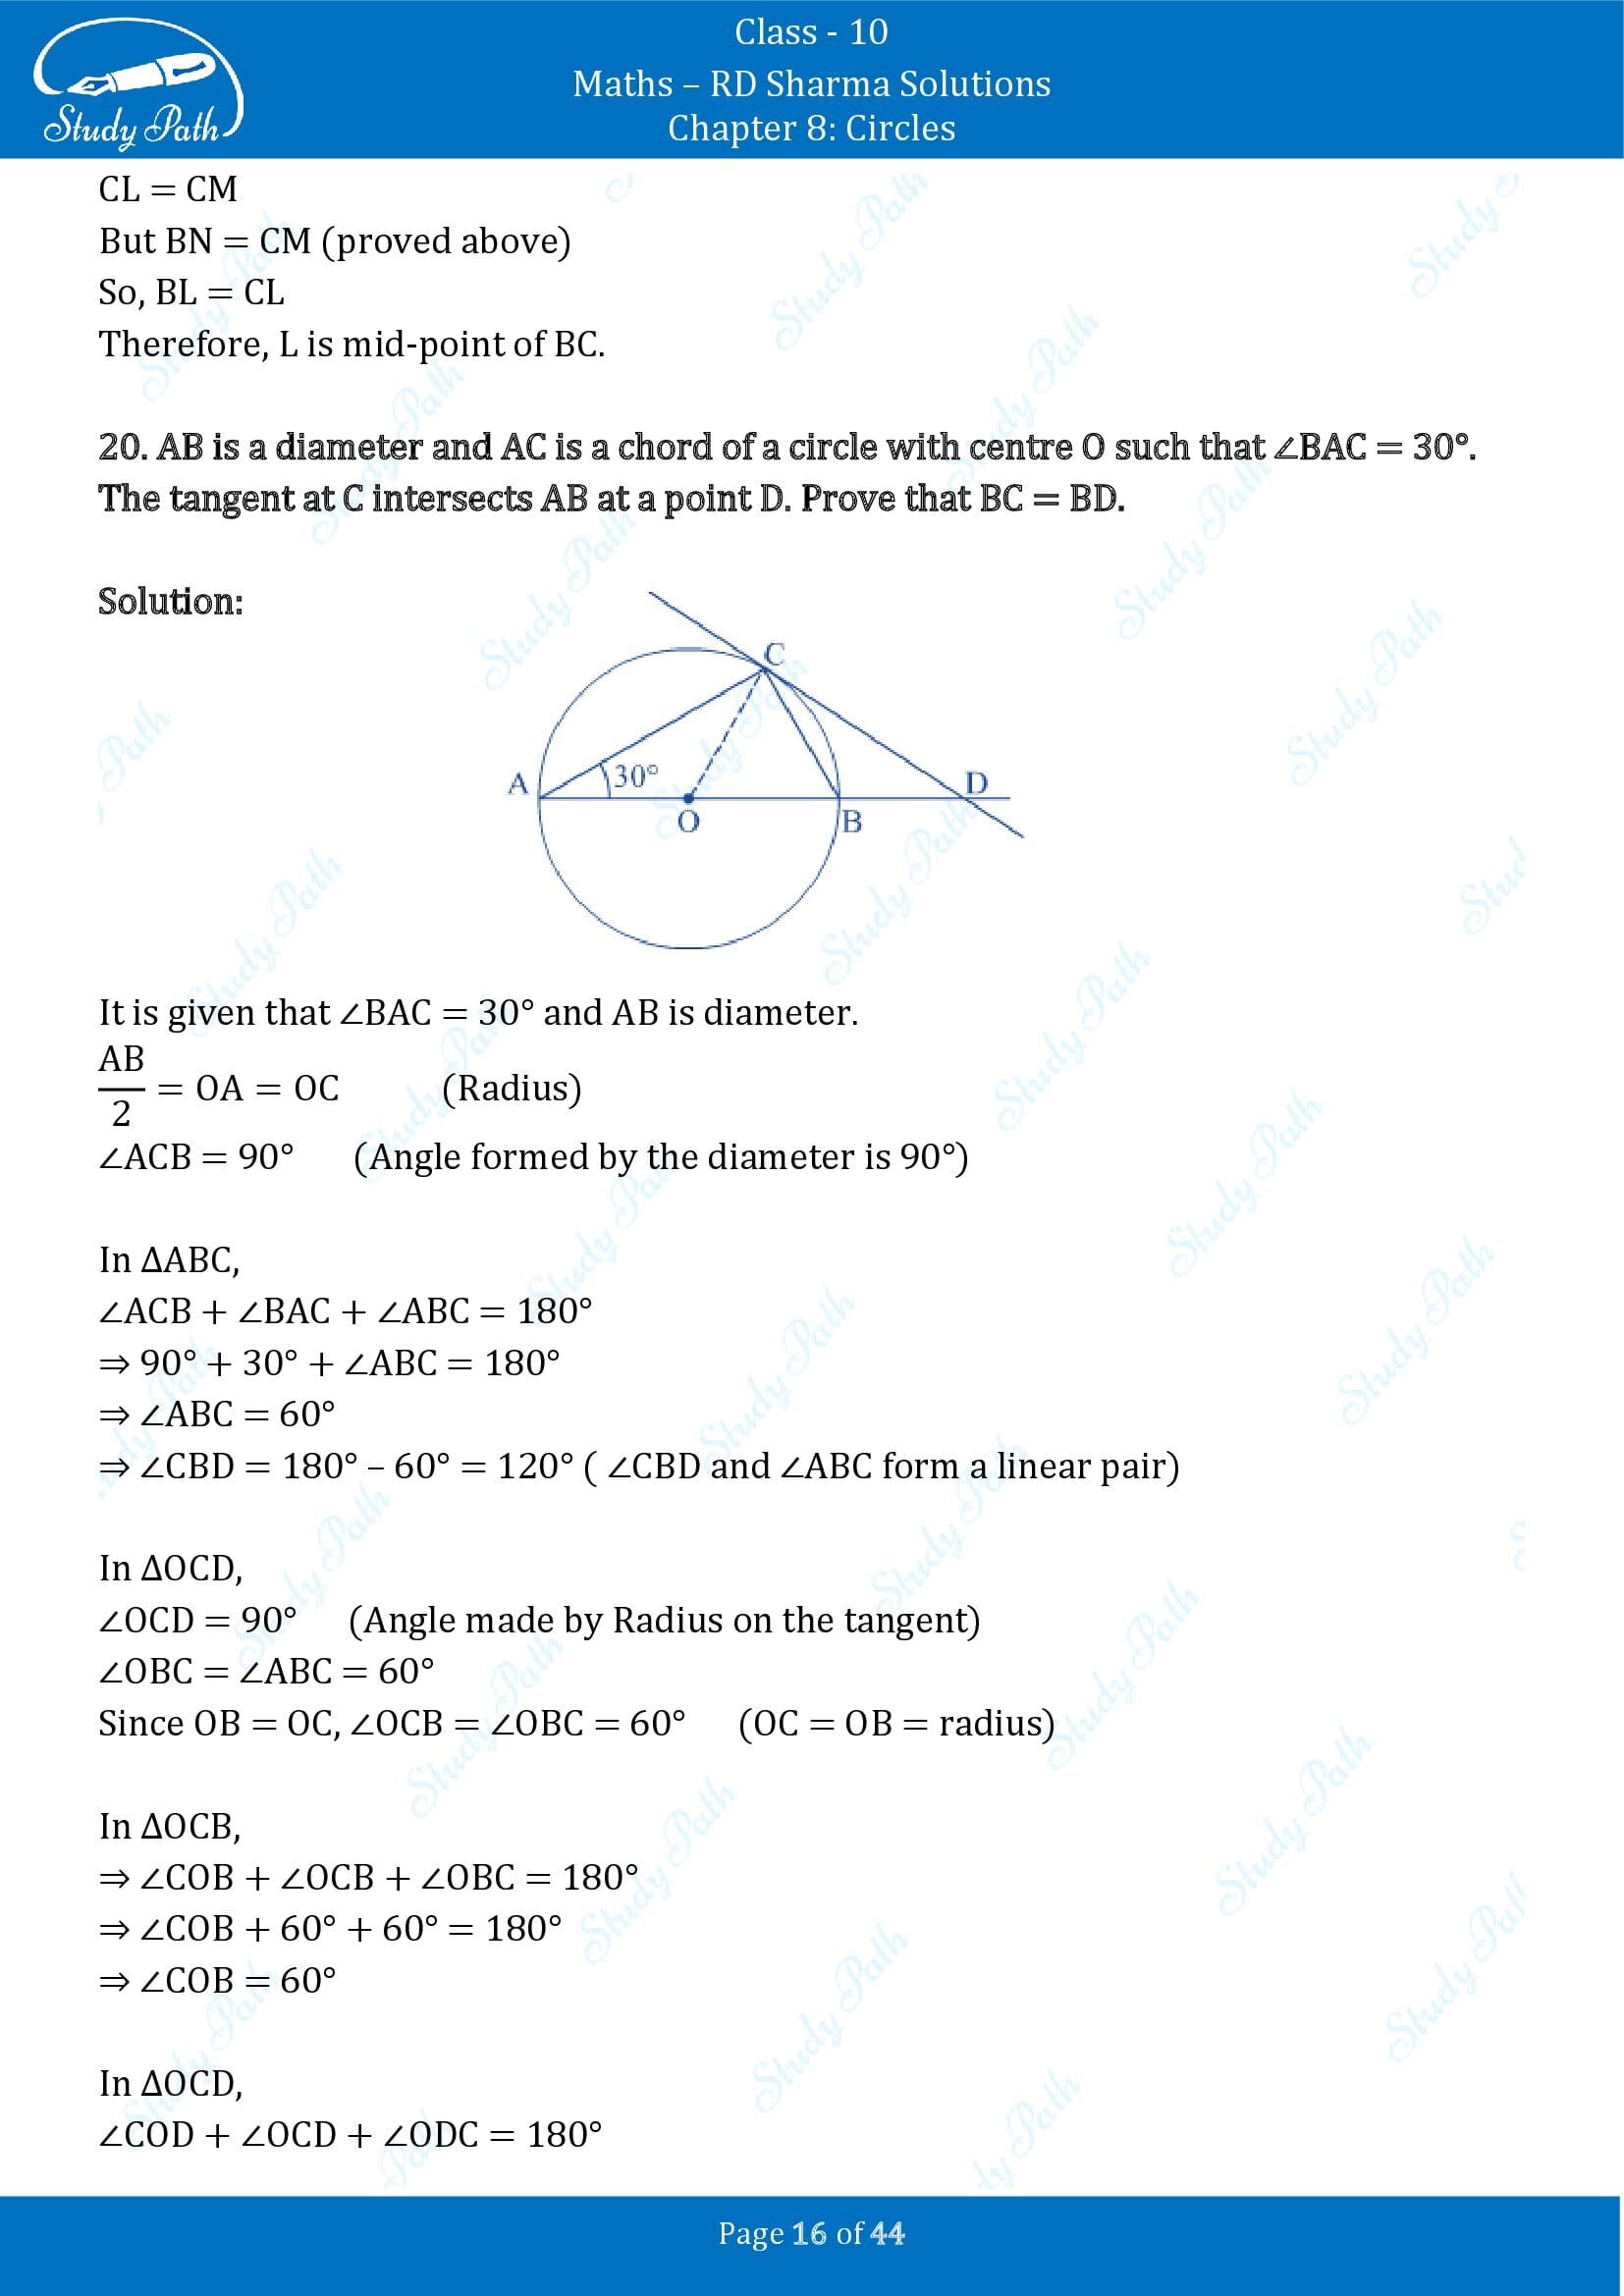 RD Sharma Solutions Class 10 Chapter 8 Circles Exercise 8.2 00016